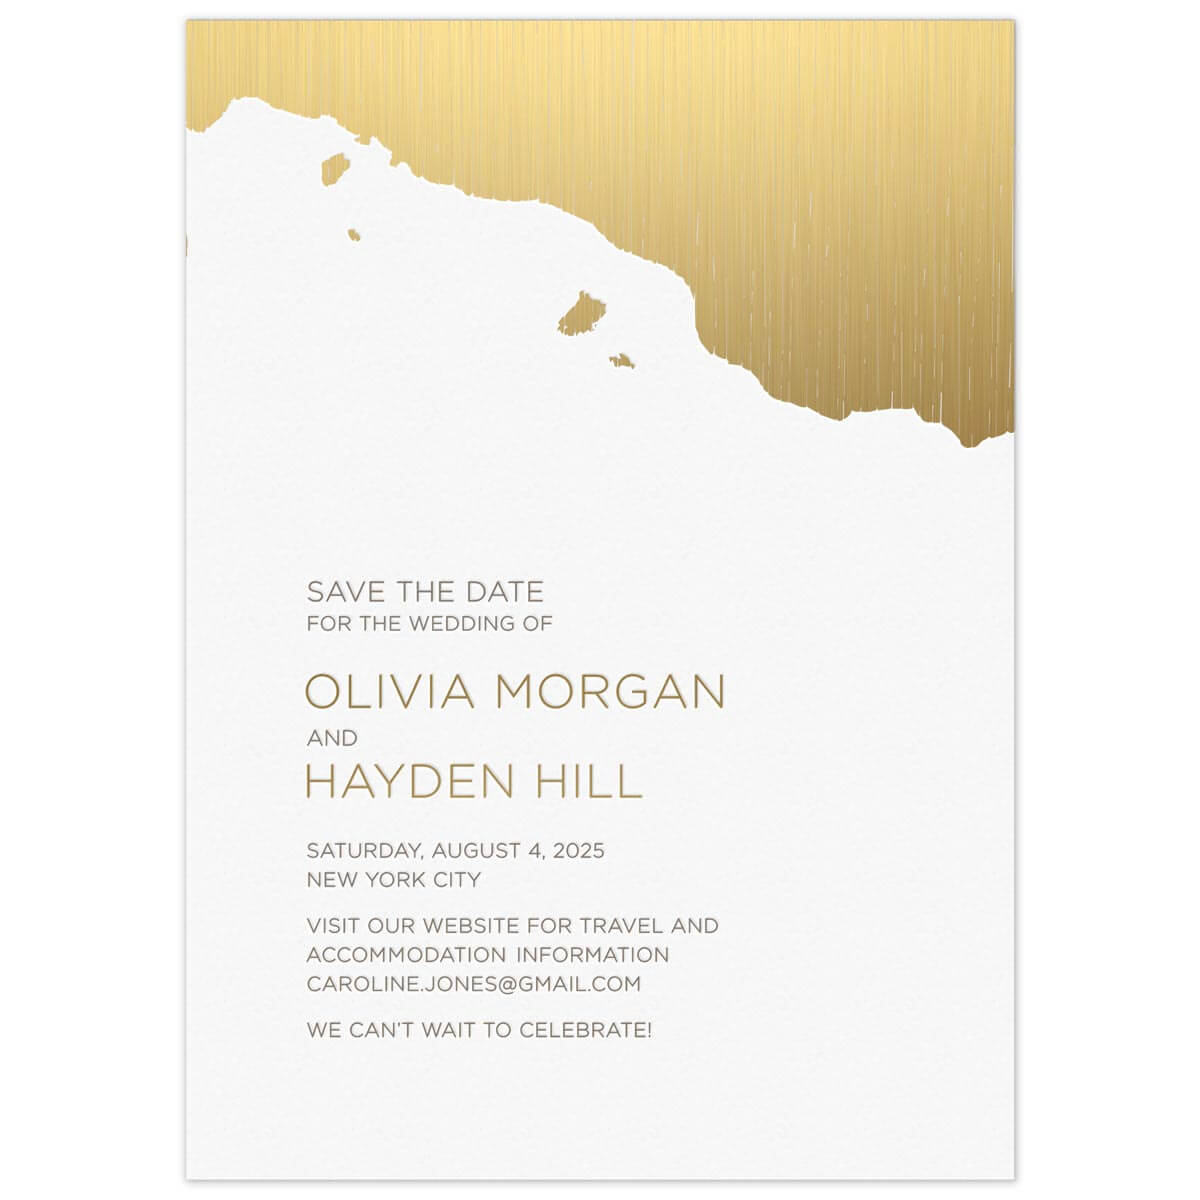 Organic modern shape in gold foil at the top of the card. Left aligned block text in pewter and gold in the white space.